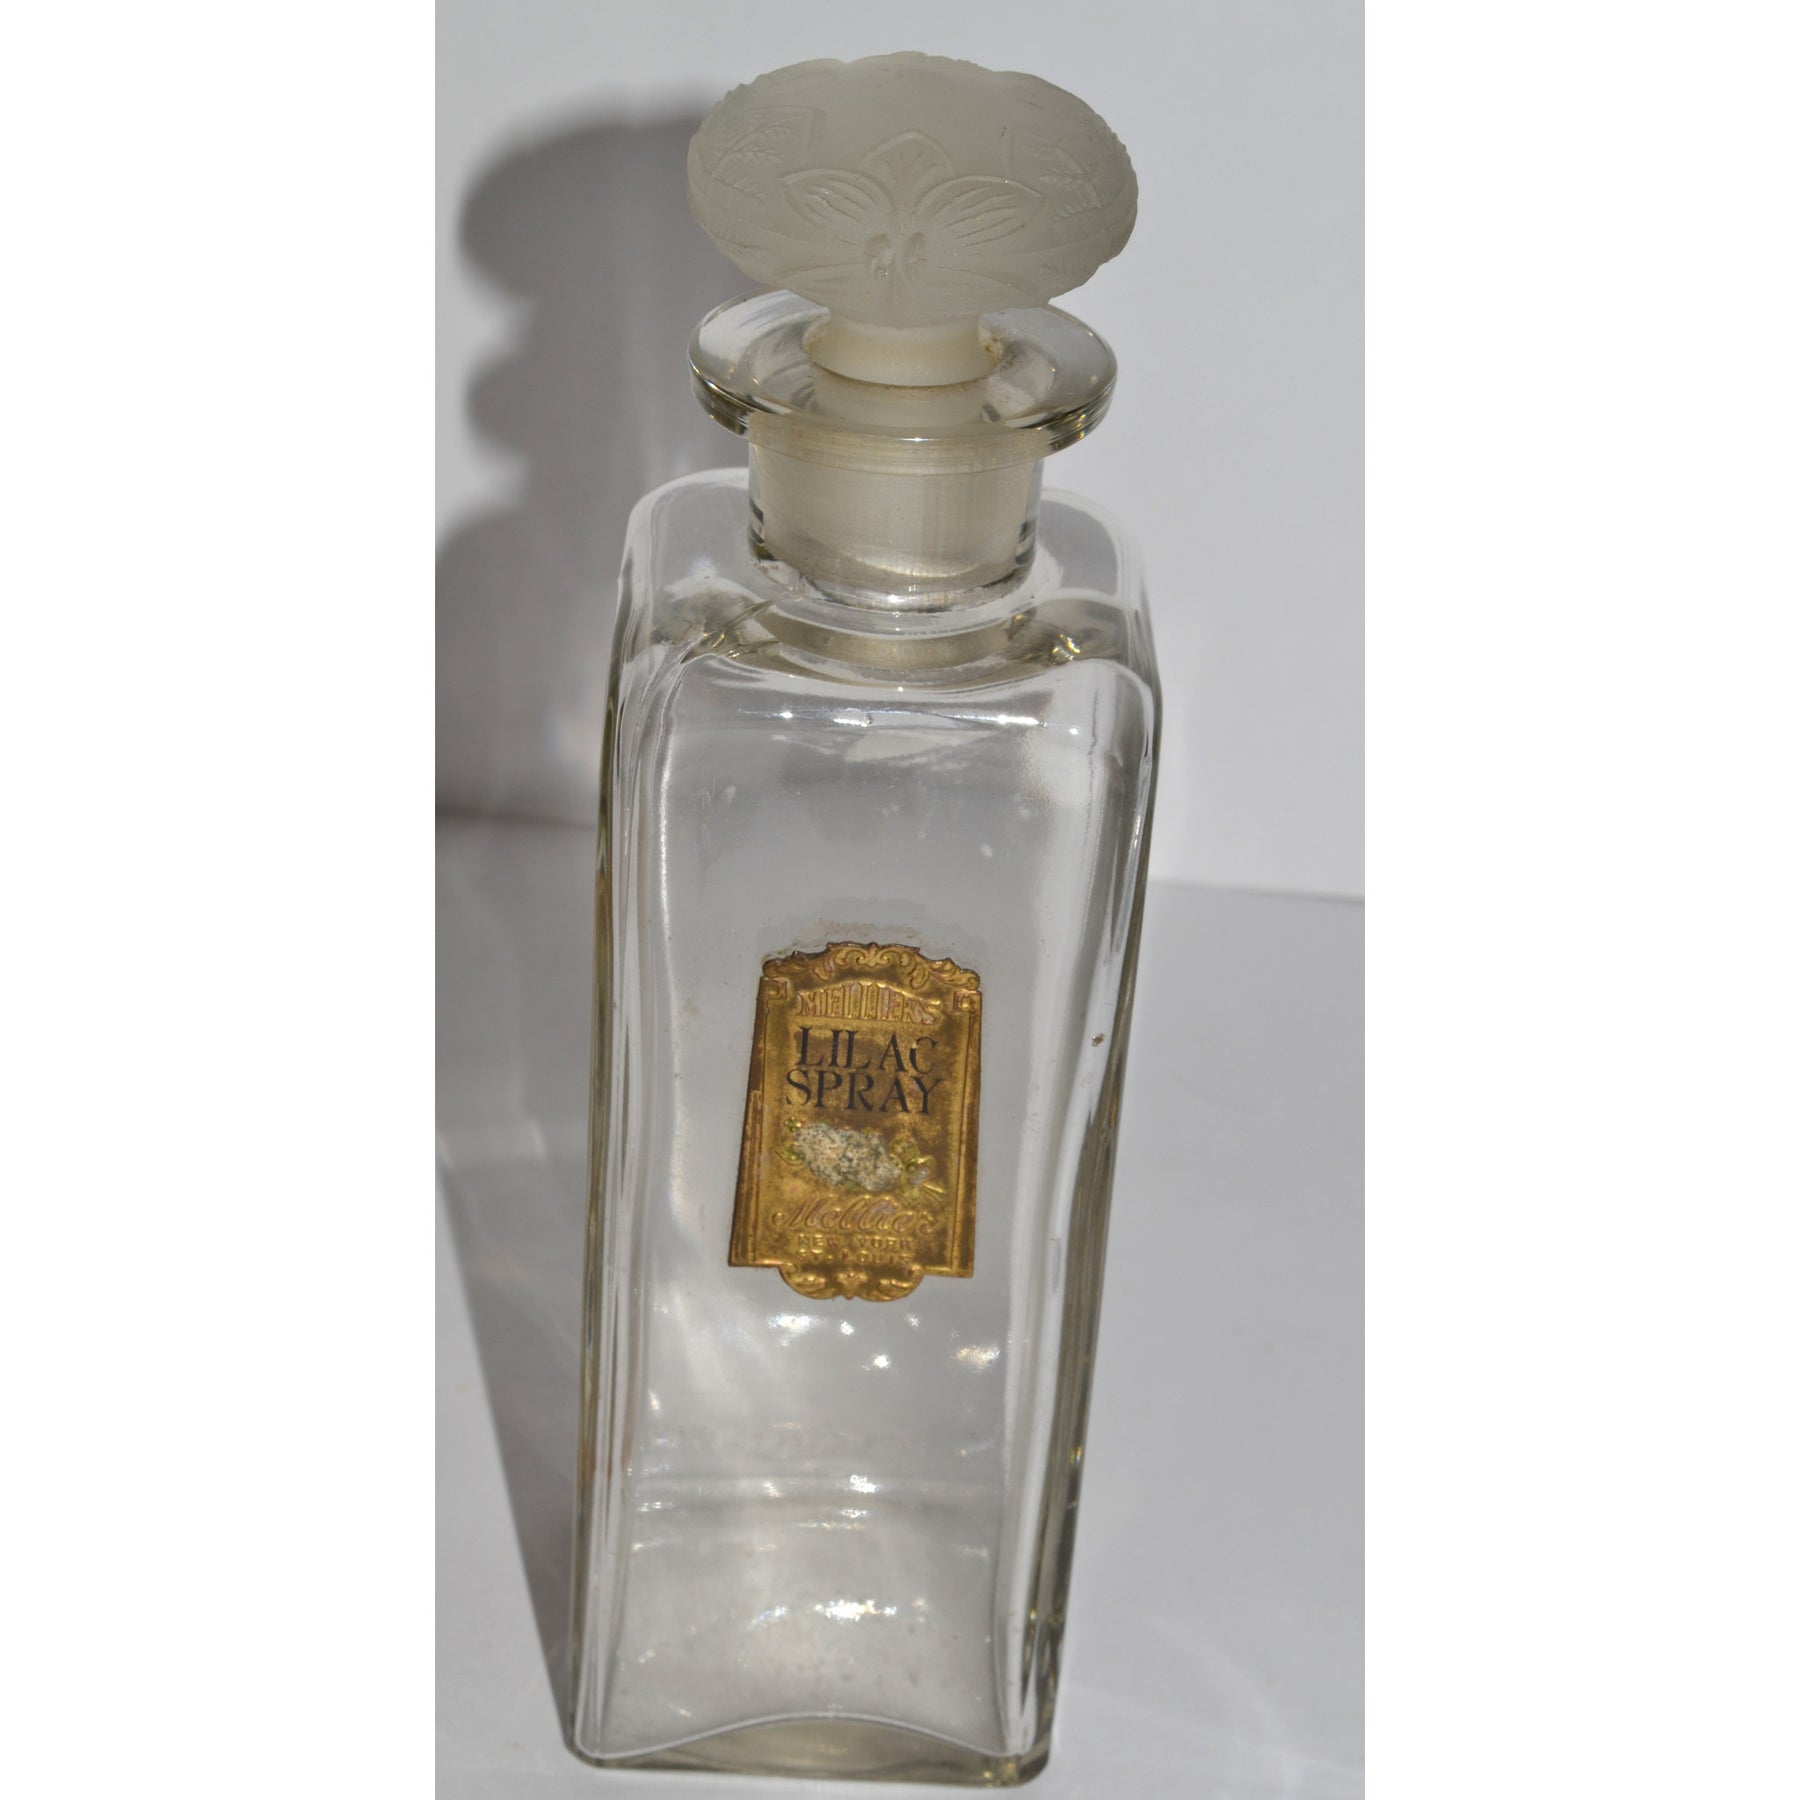 Antique Lilac Spray Perfume Bottle By Mellier – Quirky Finds